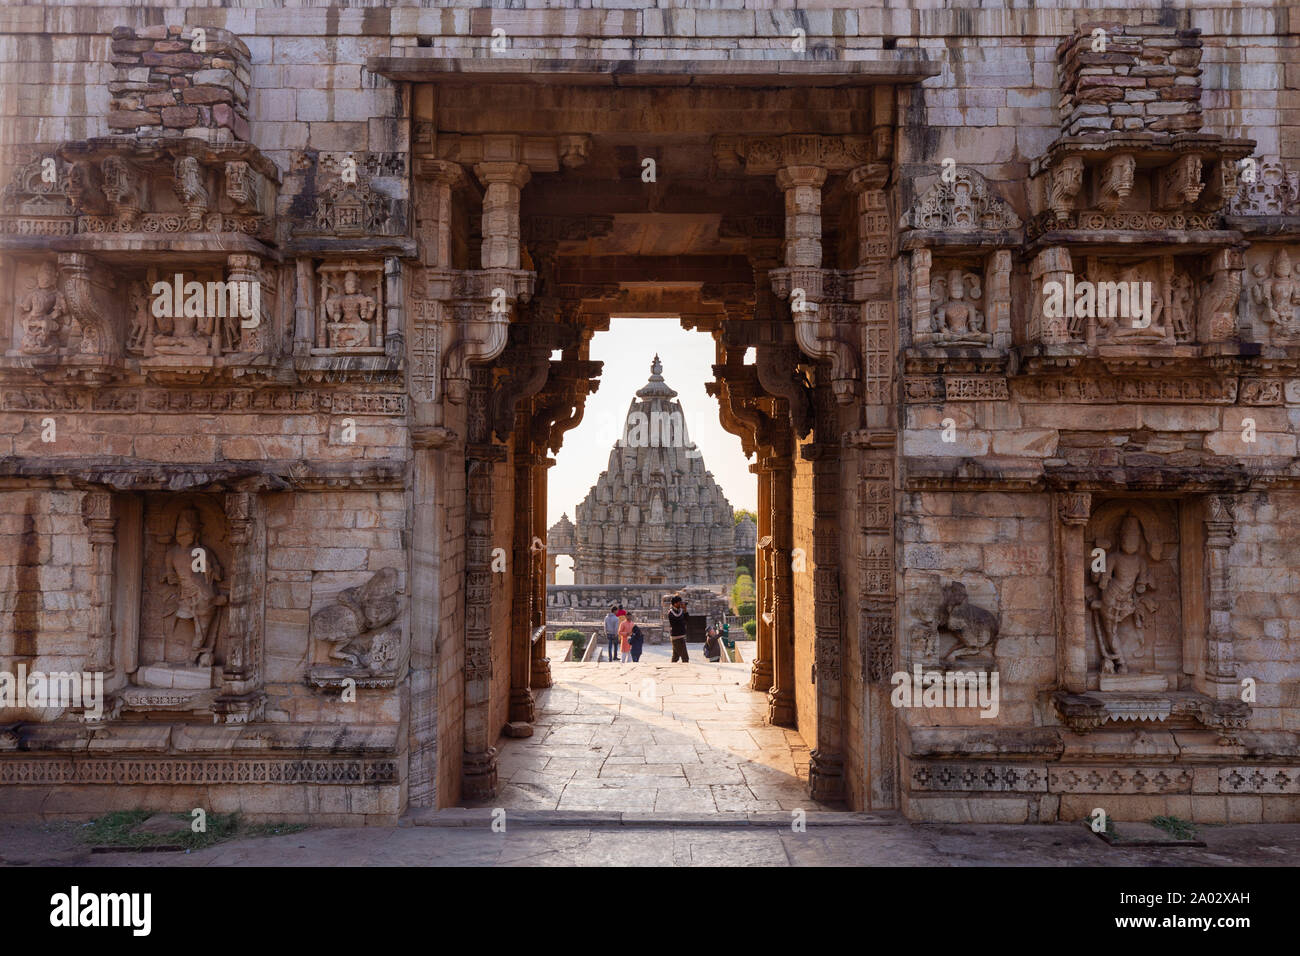 Gate with stone carvings in Chittorgarh Fort, Rajasthan, India Stock Photo